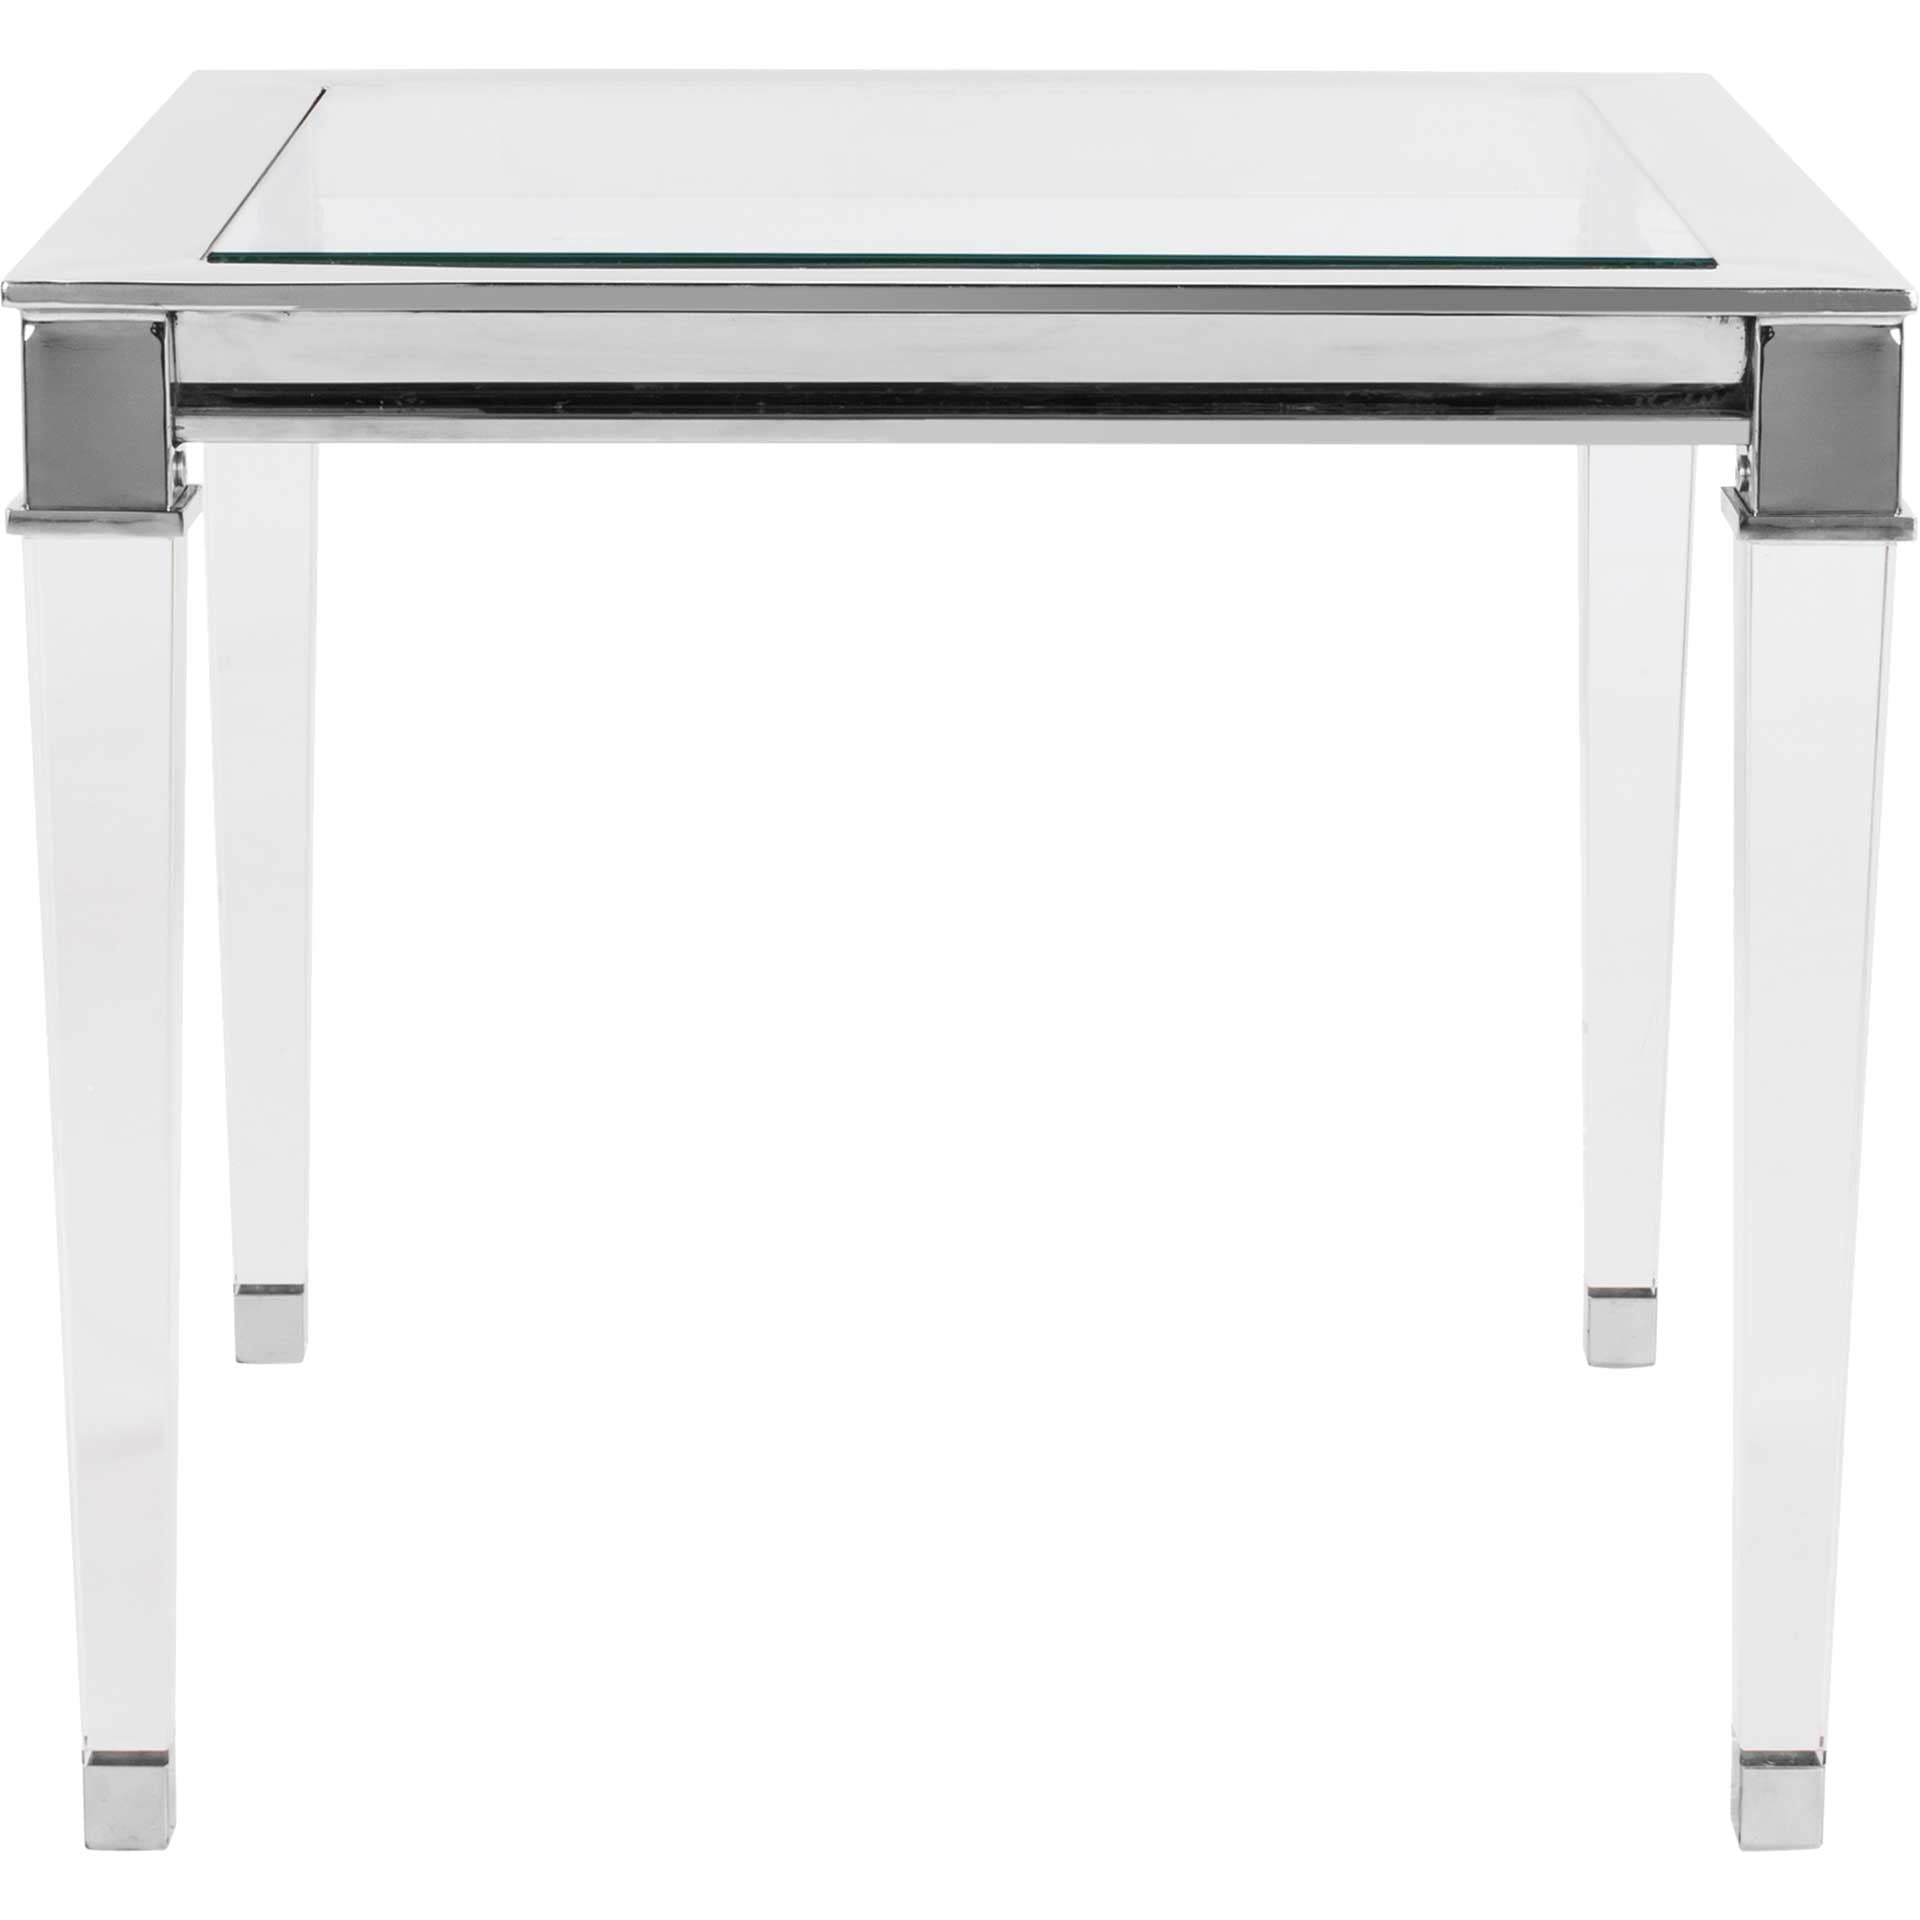 Channing Acrylic End Table